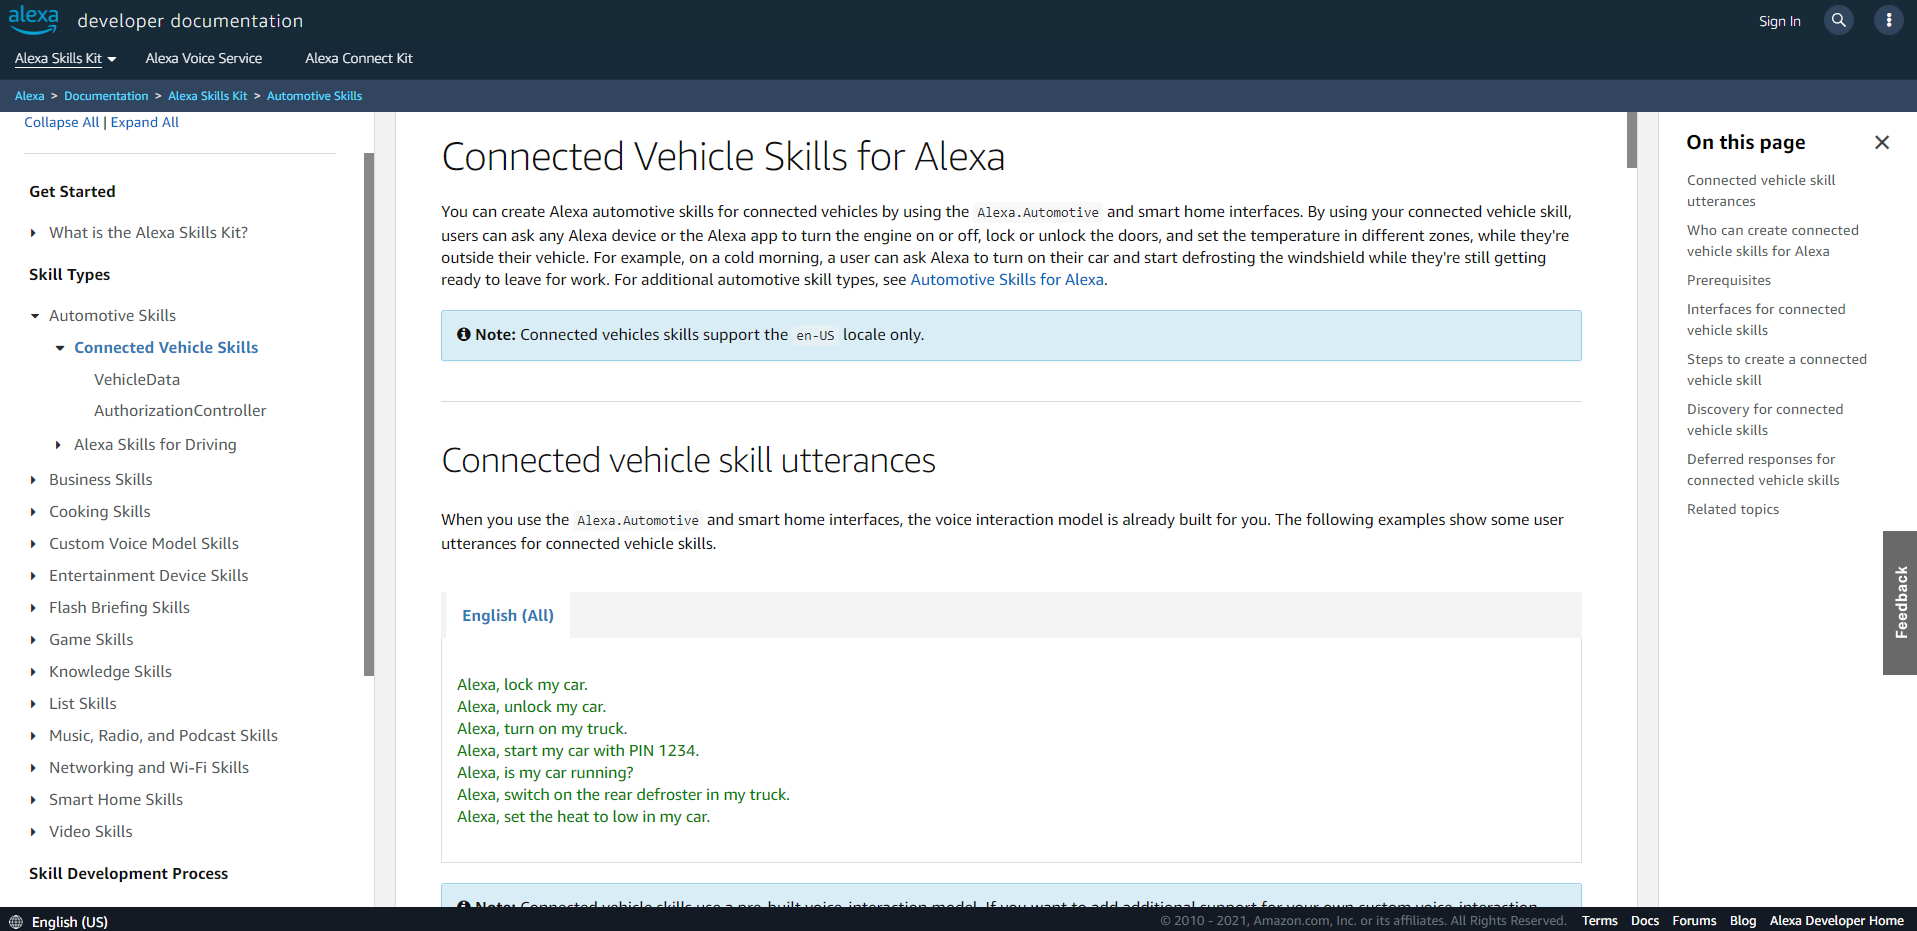 About Connected Vehicle Skills for Alexa - Technical Documentation